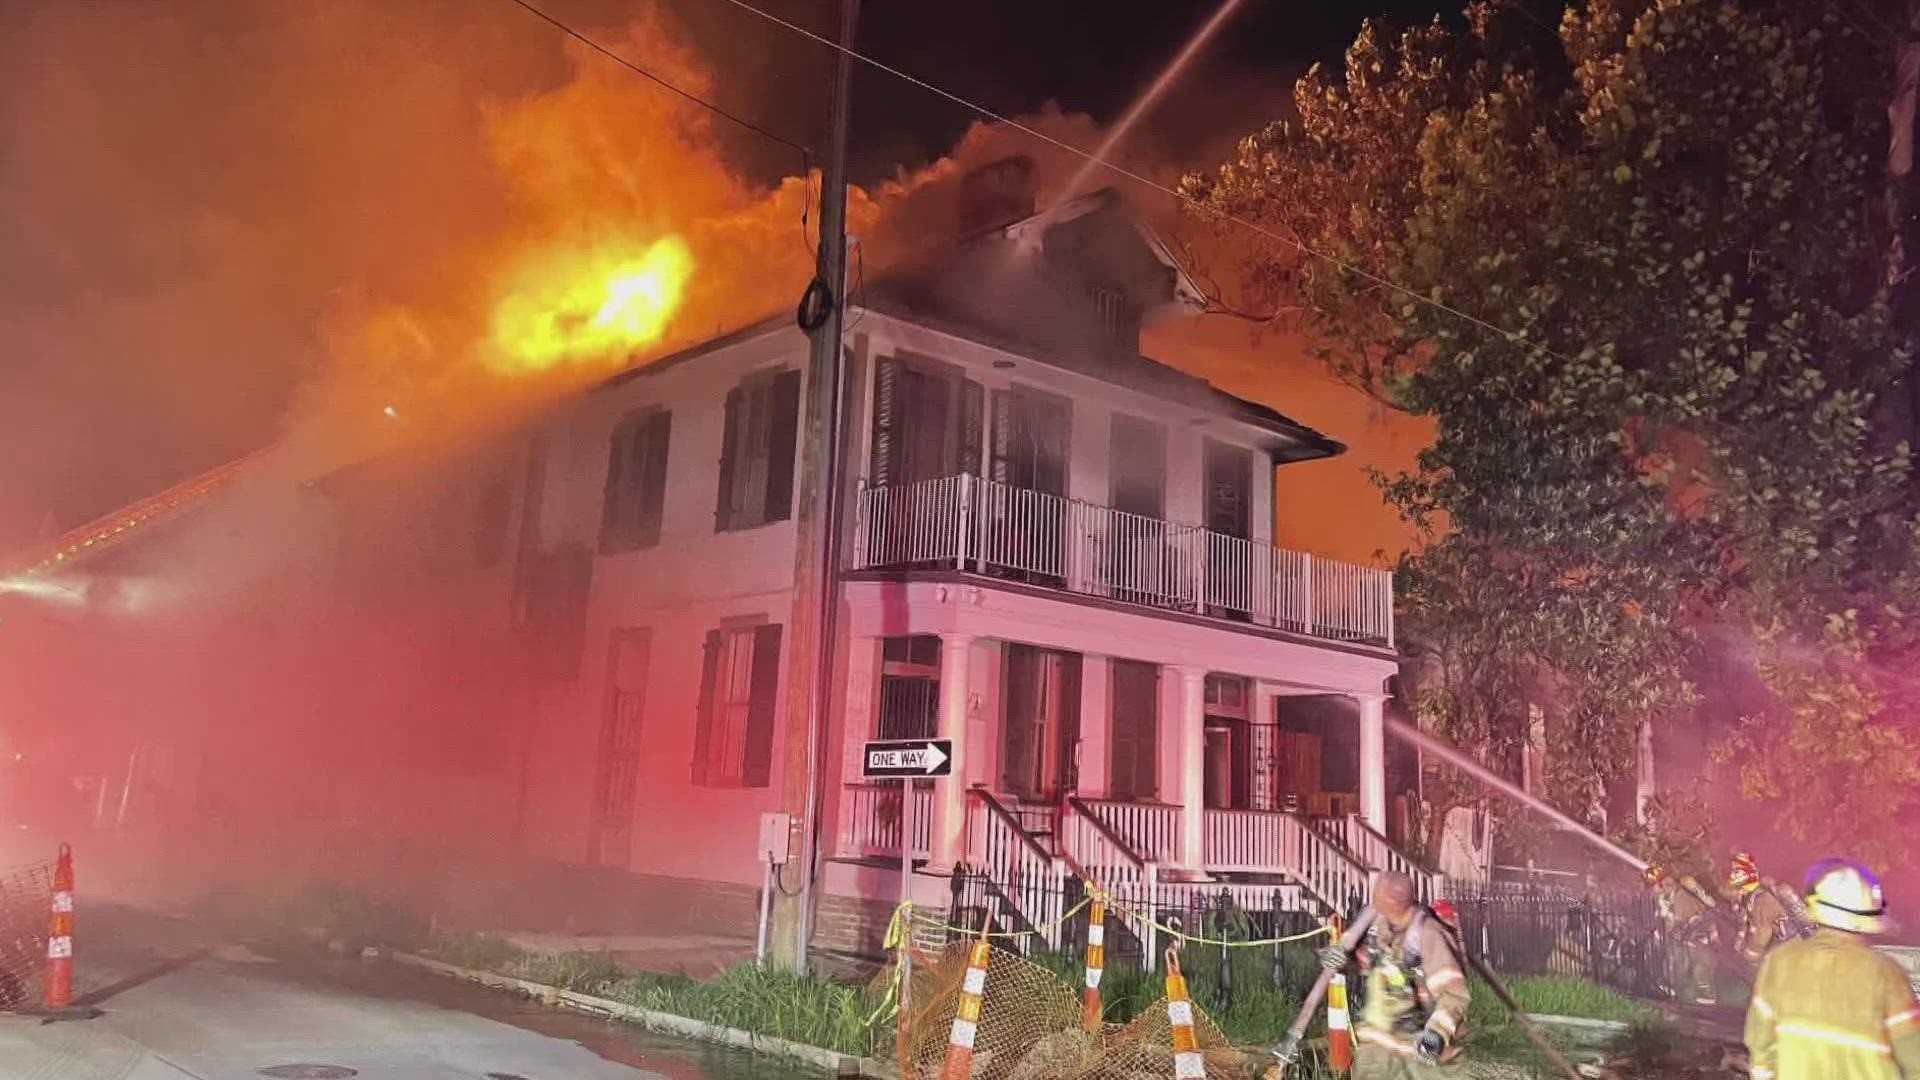 Crews battled the fire near the corner of Baronne and First Streets.